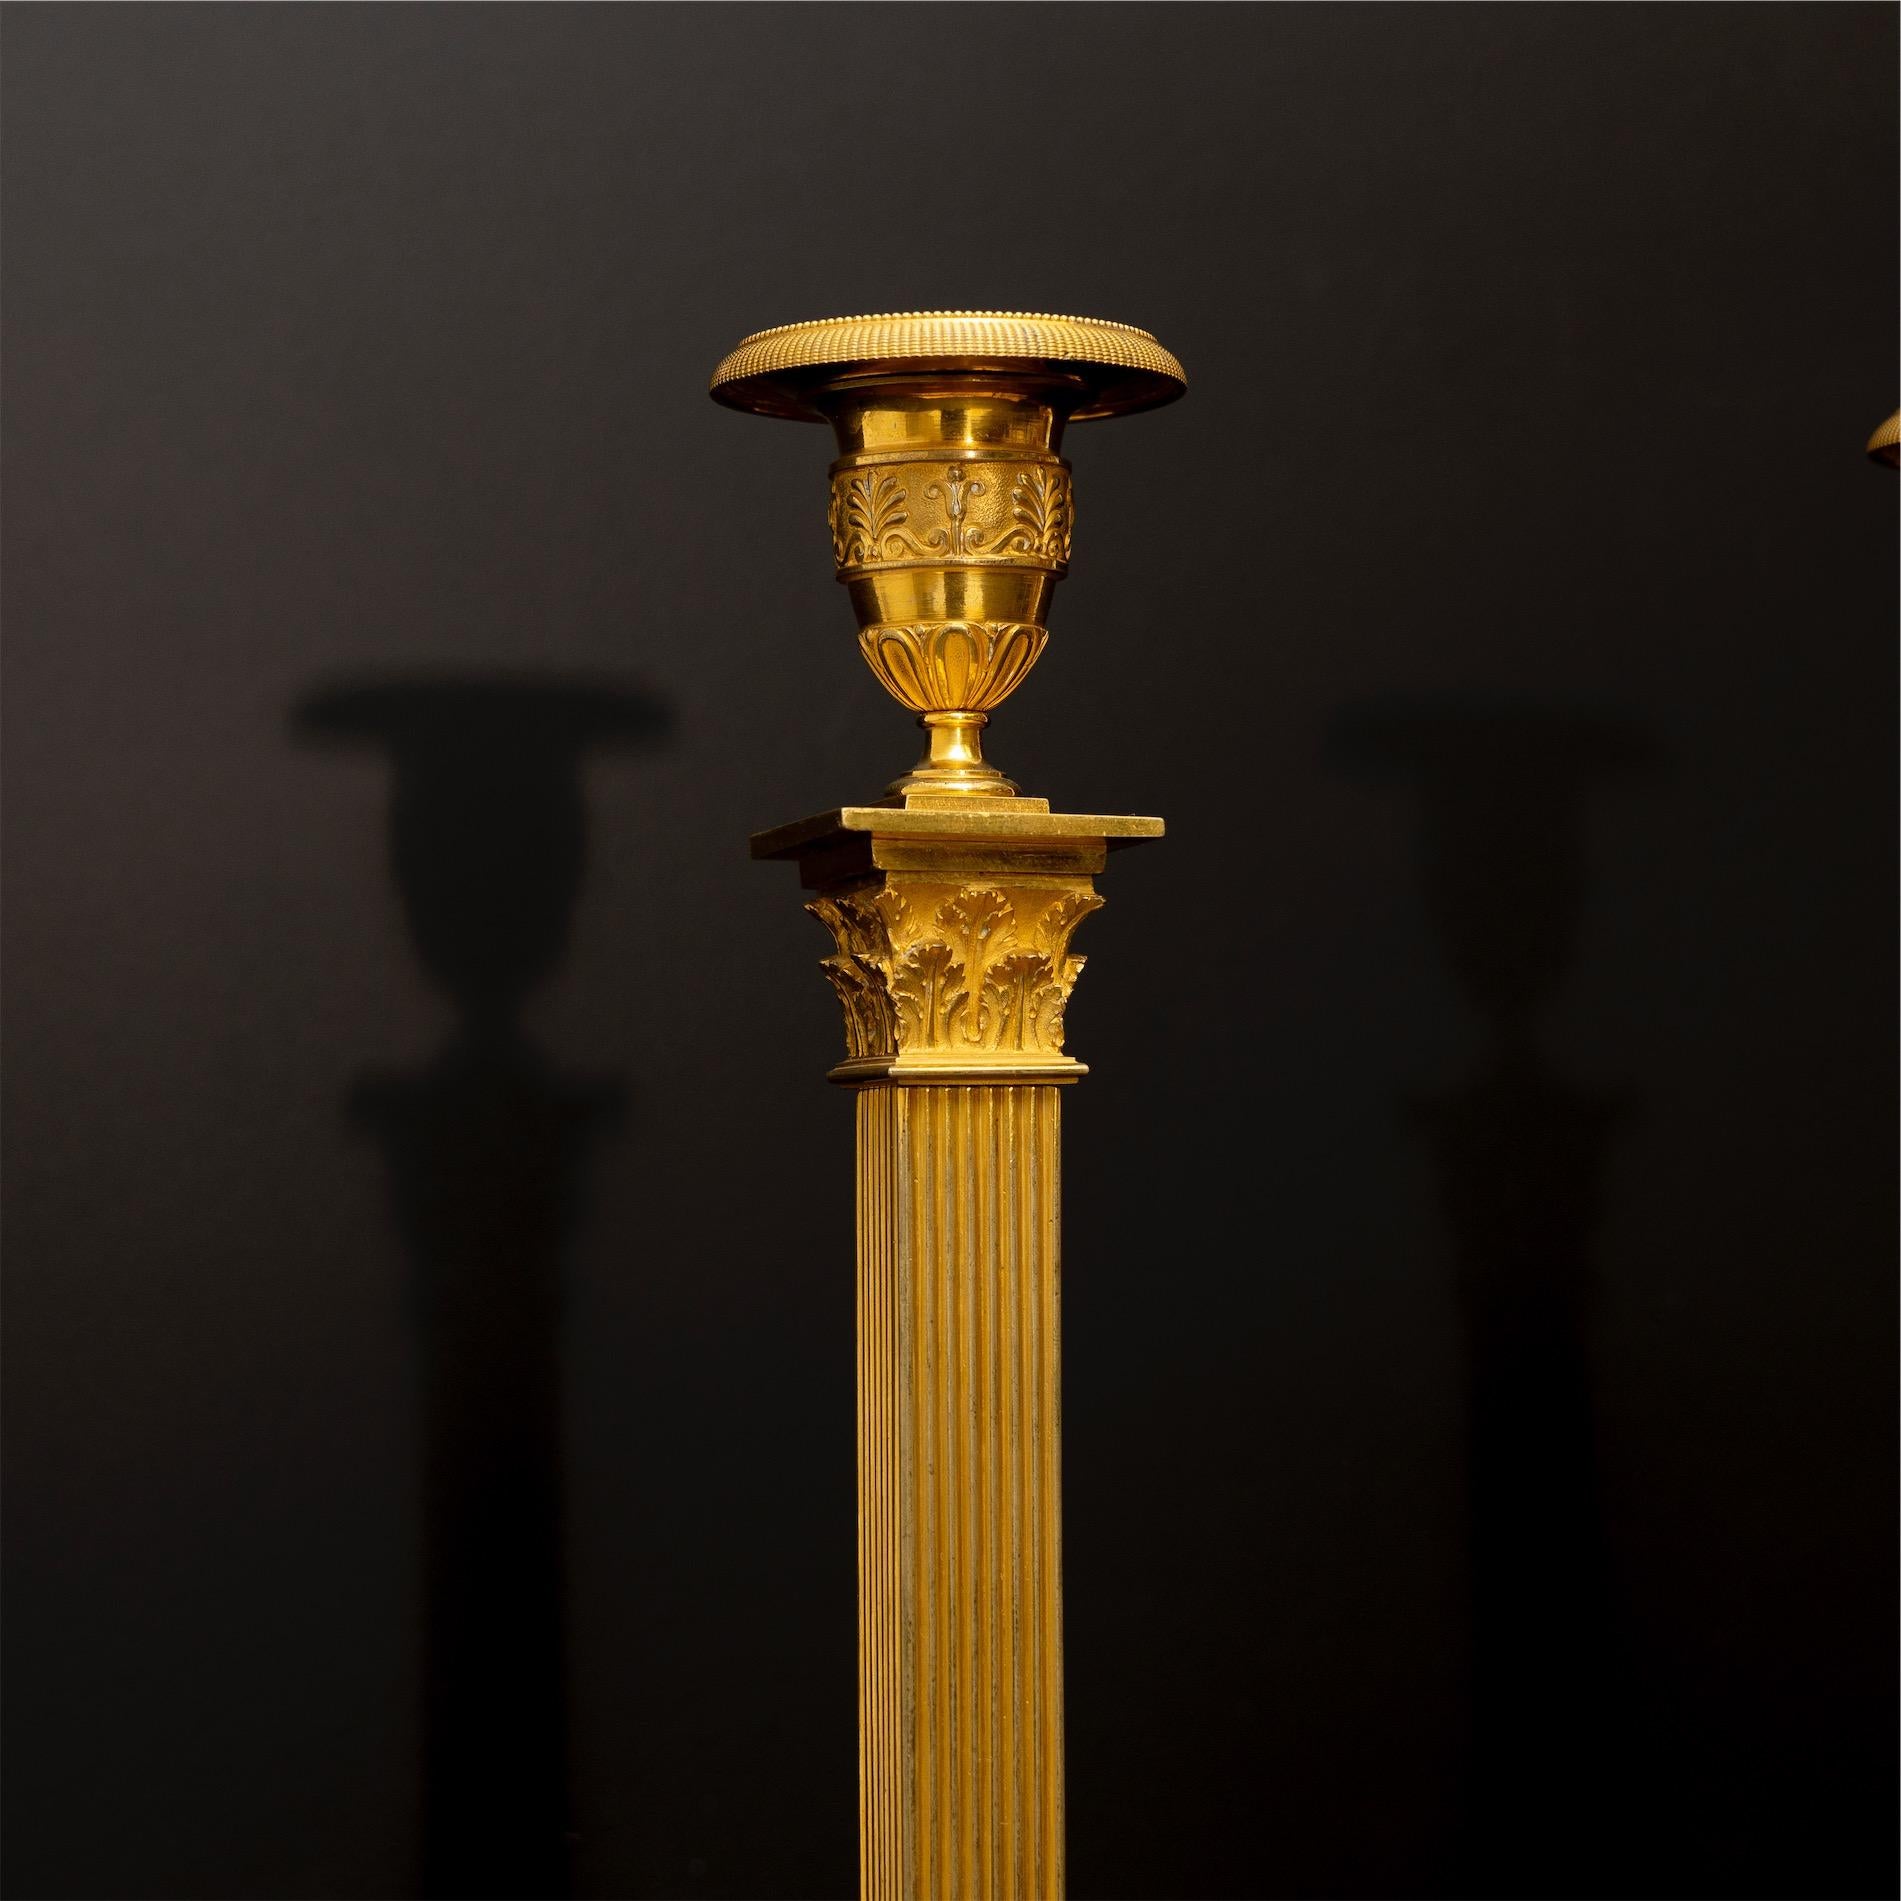 Bronze Pair of Candlesticks, Empire, Sweden, Early 19th Century